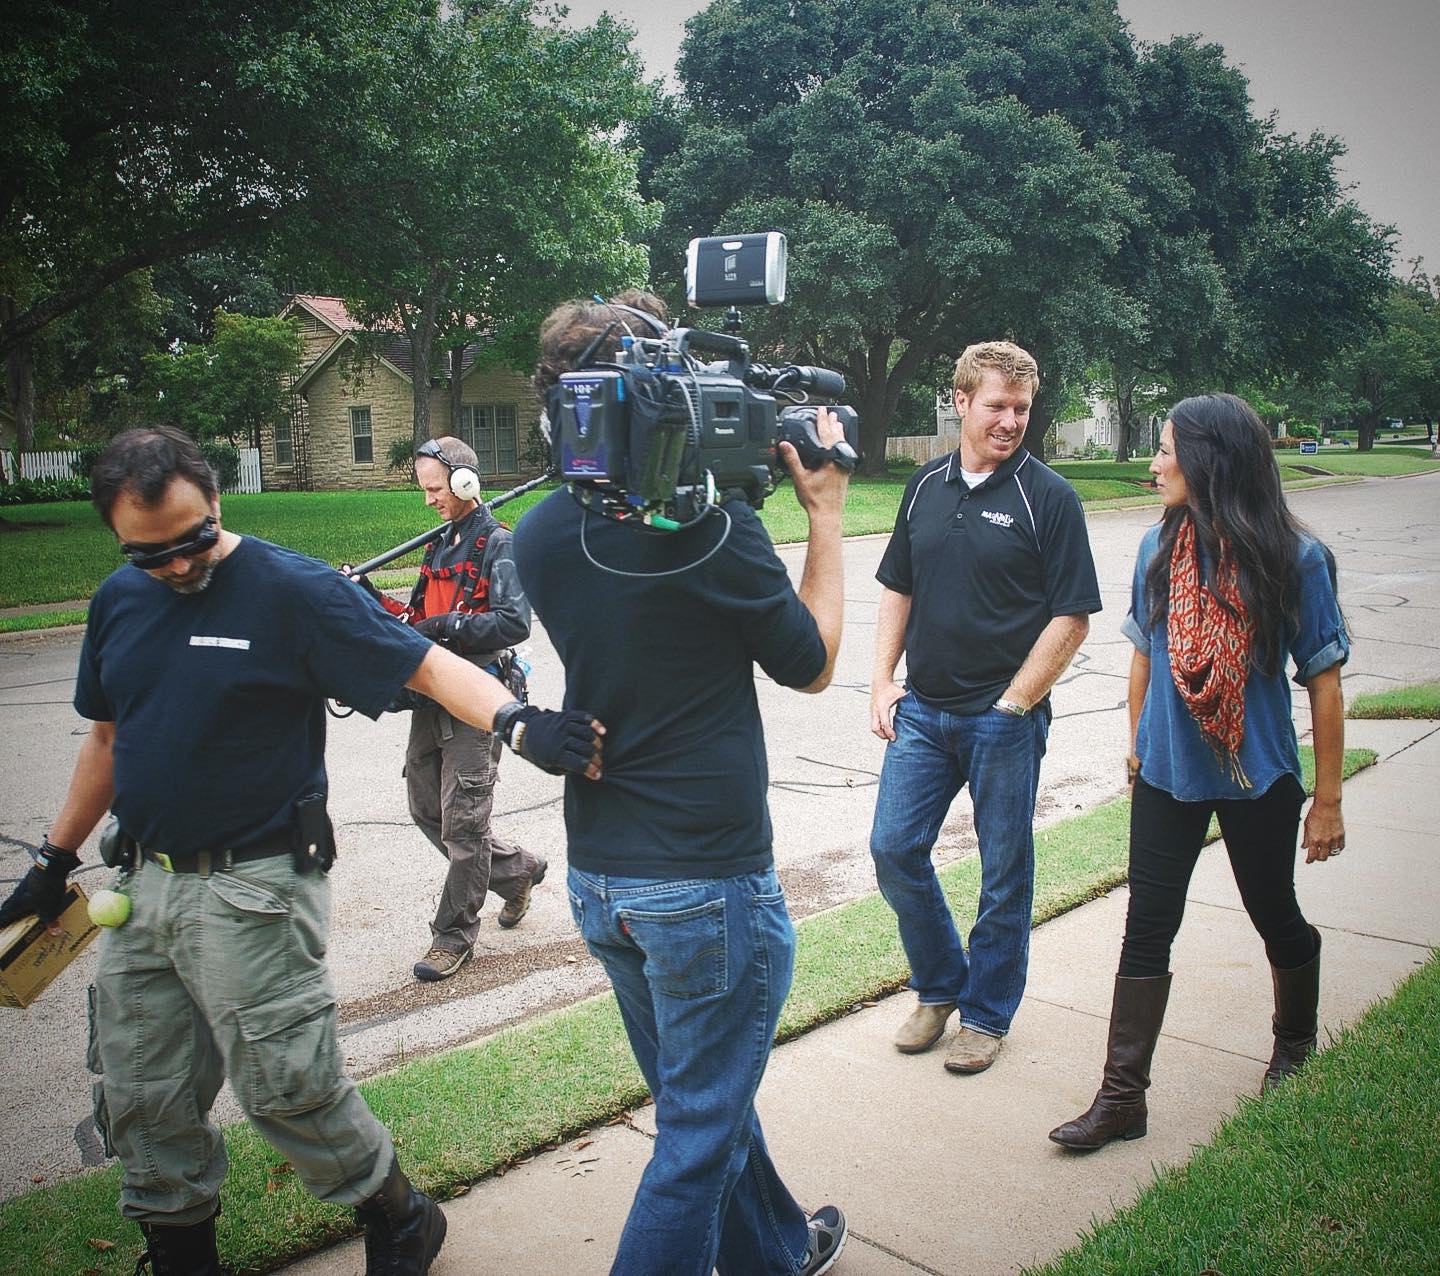 Fixer Upper stars Chip and Joanna Gaines are returning with a new season of the show. Here, they're pictured filming.